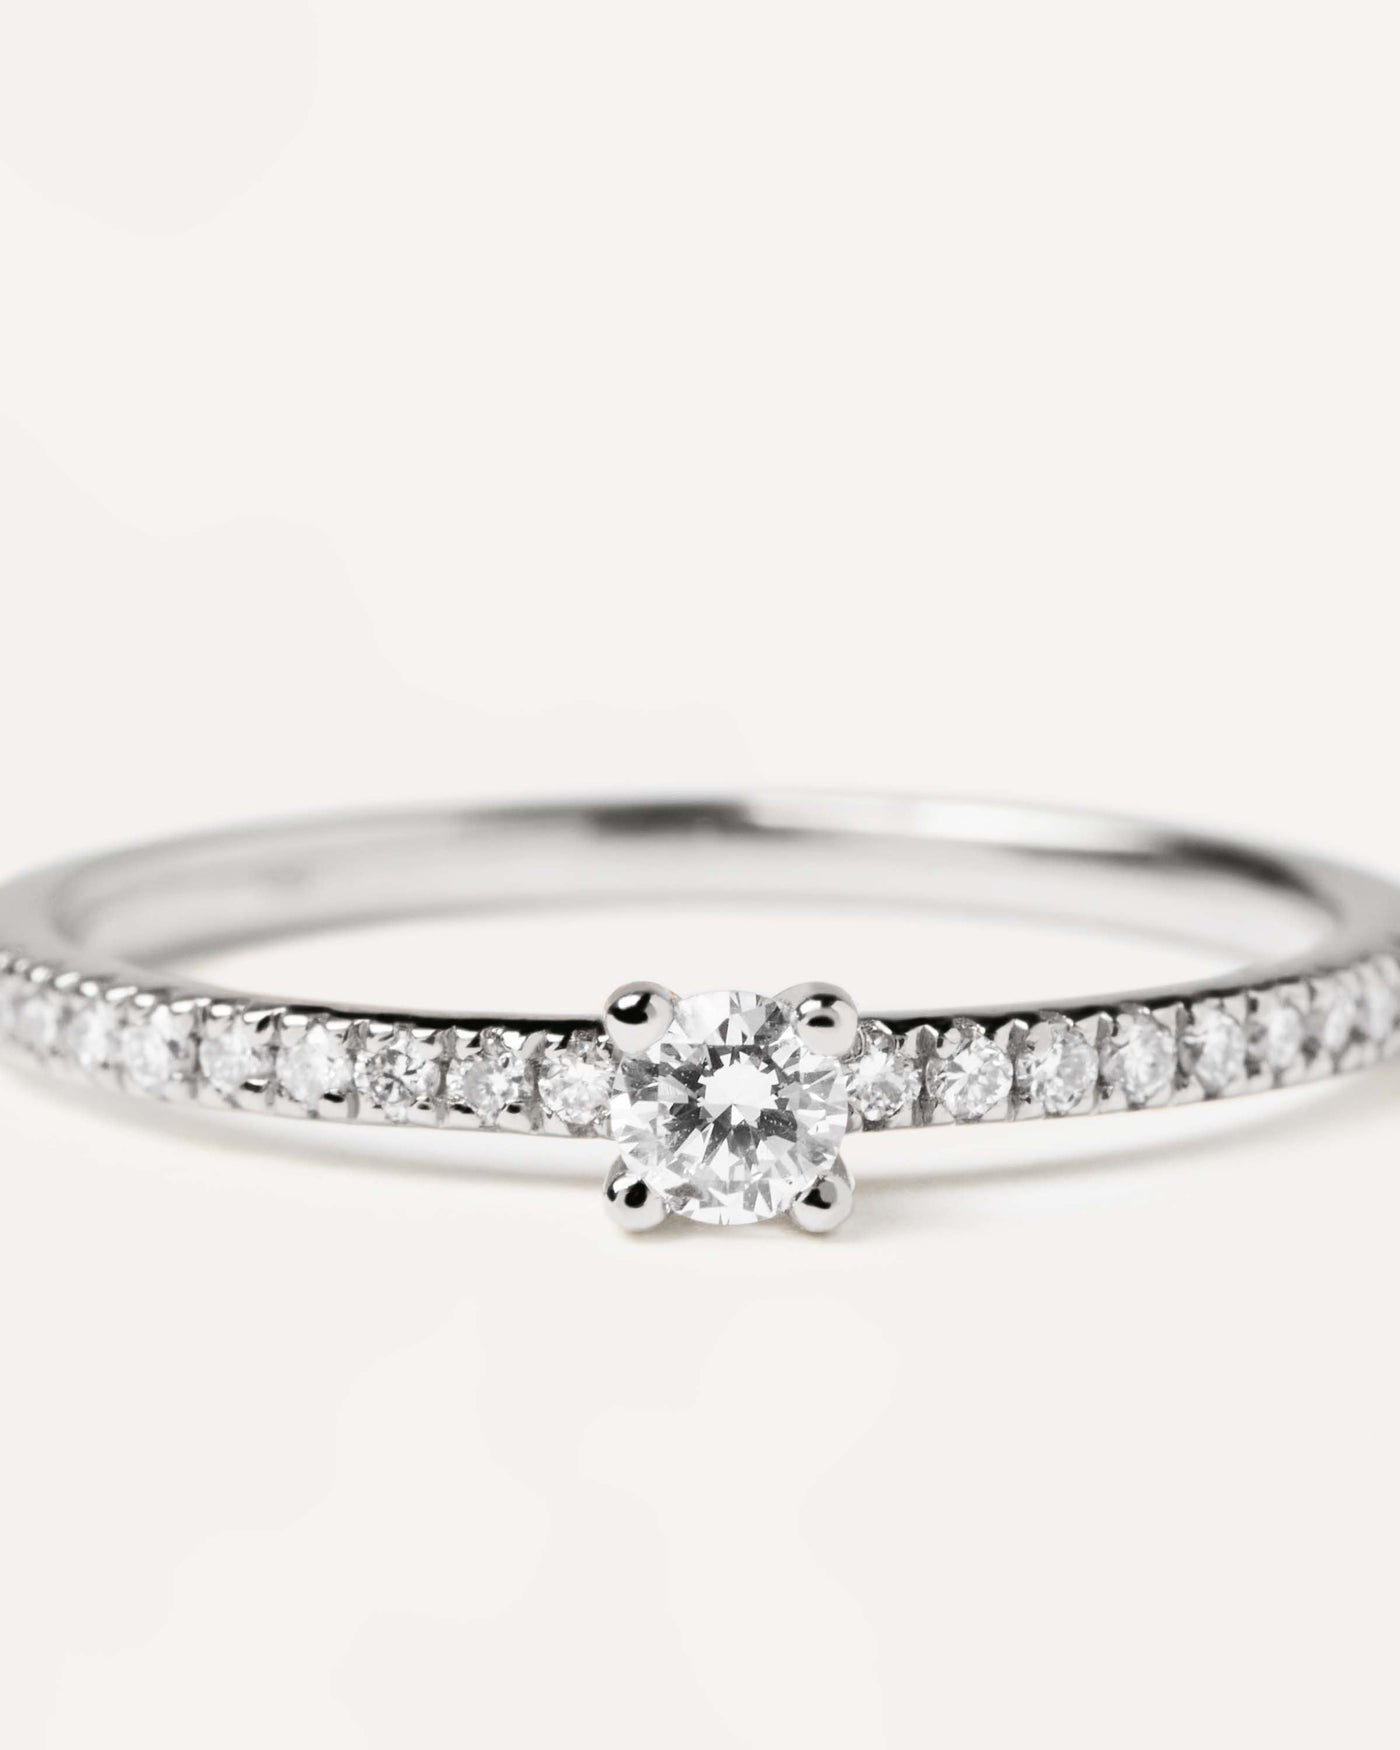 Diamonds and White Gold Solstice Ring - 18K solid white gold